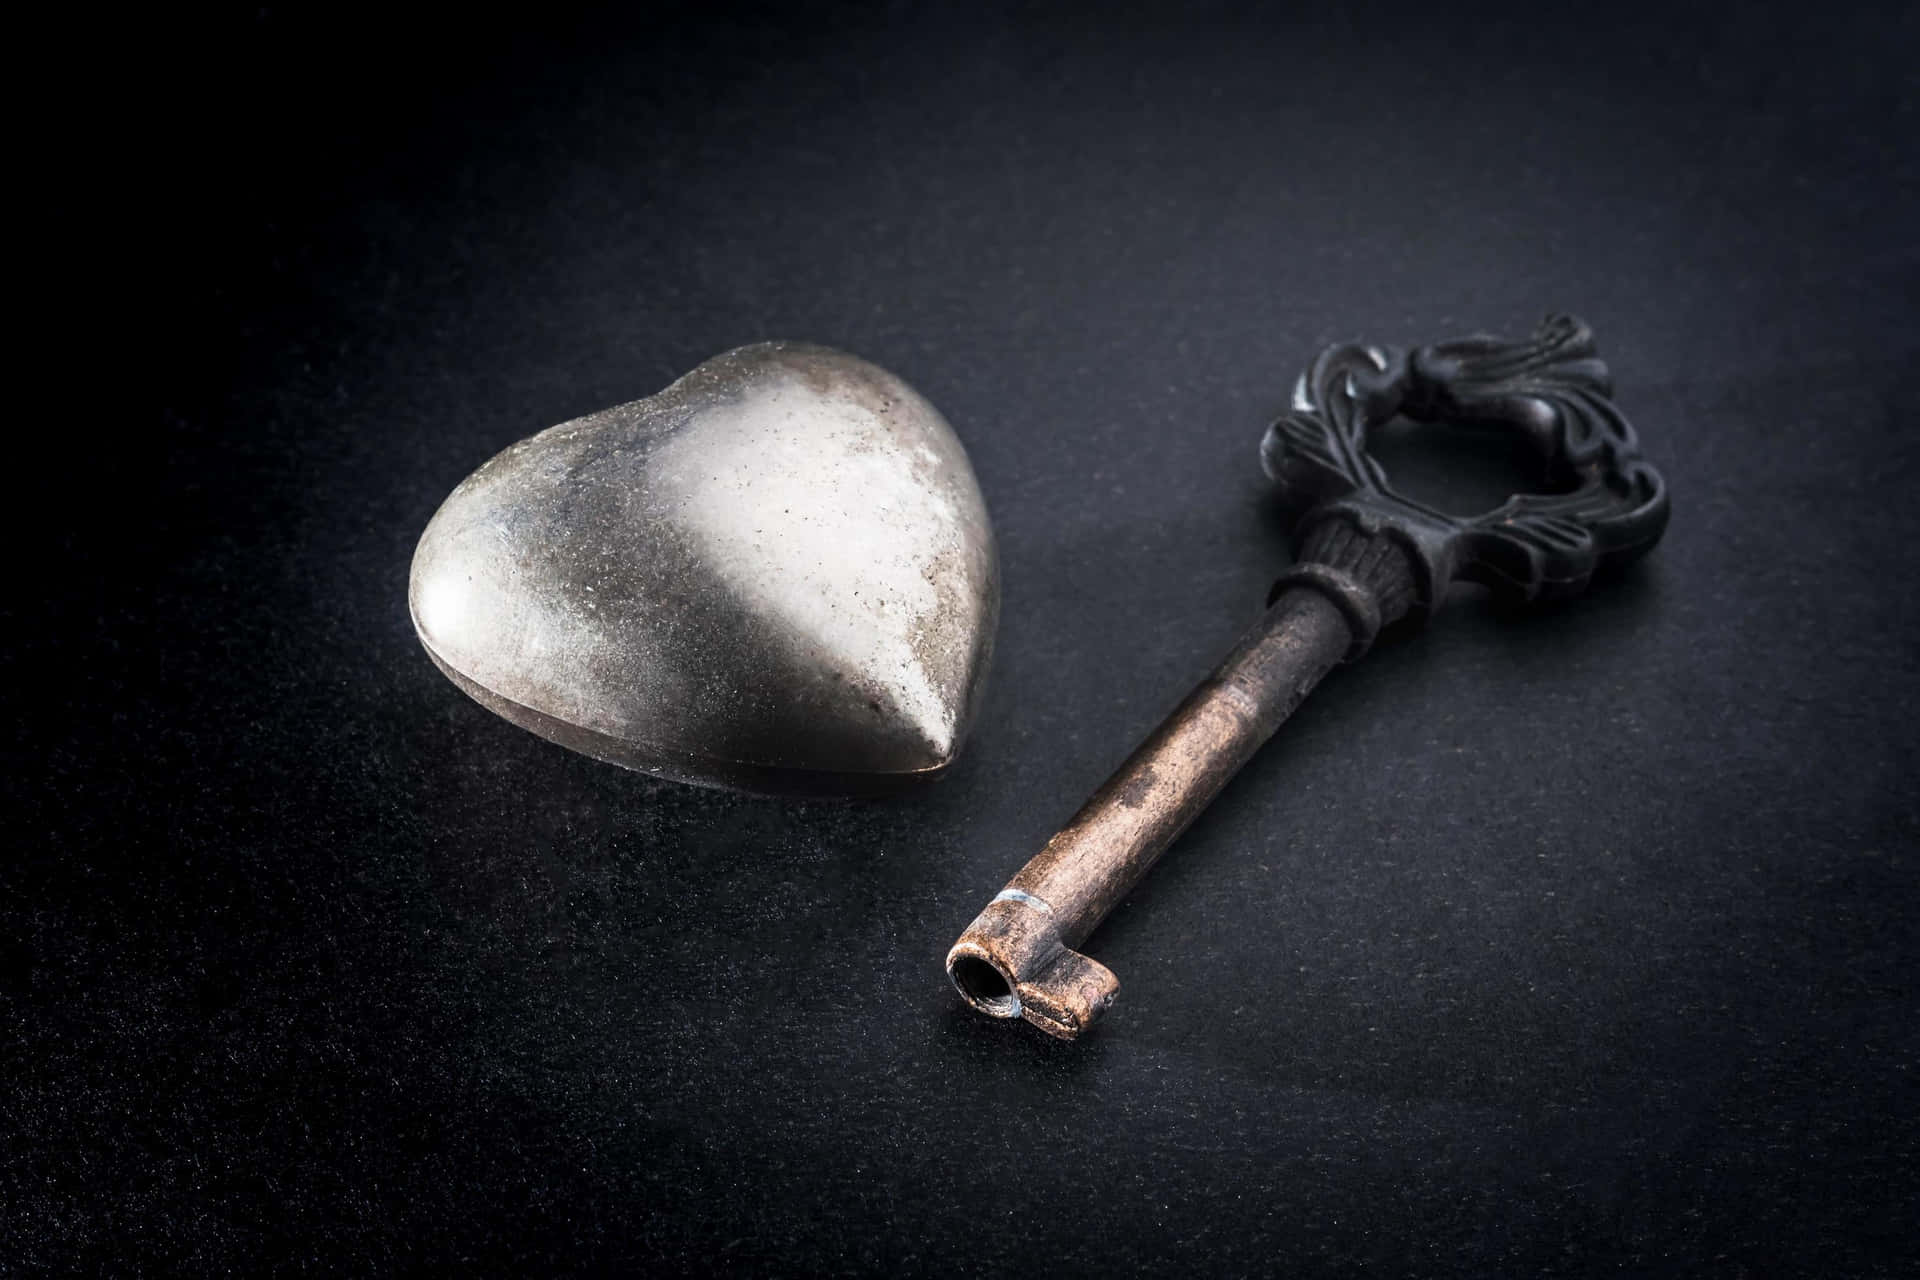 a key and a heart shaped metal object on a black background